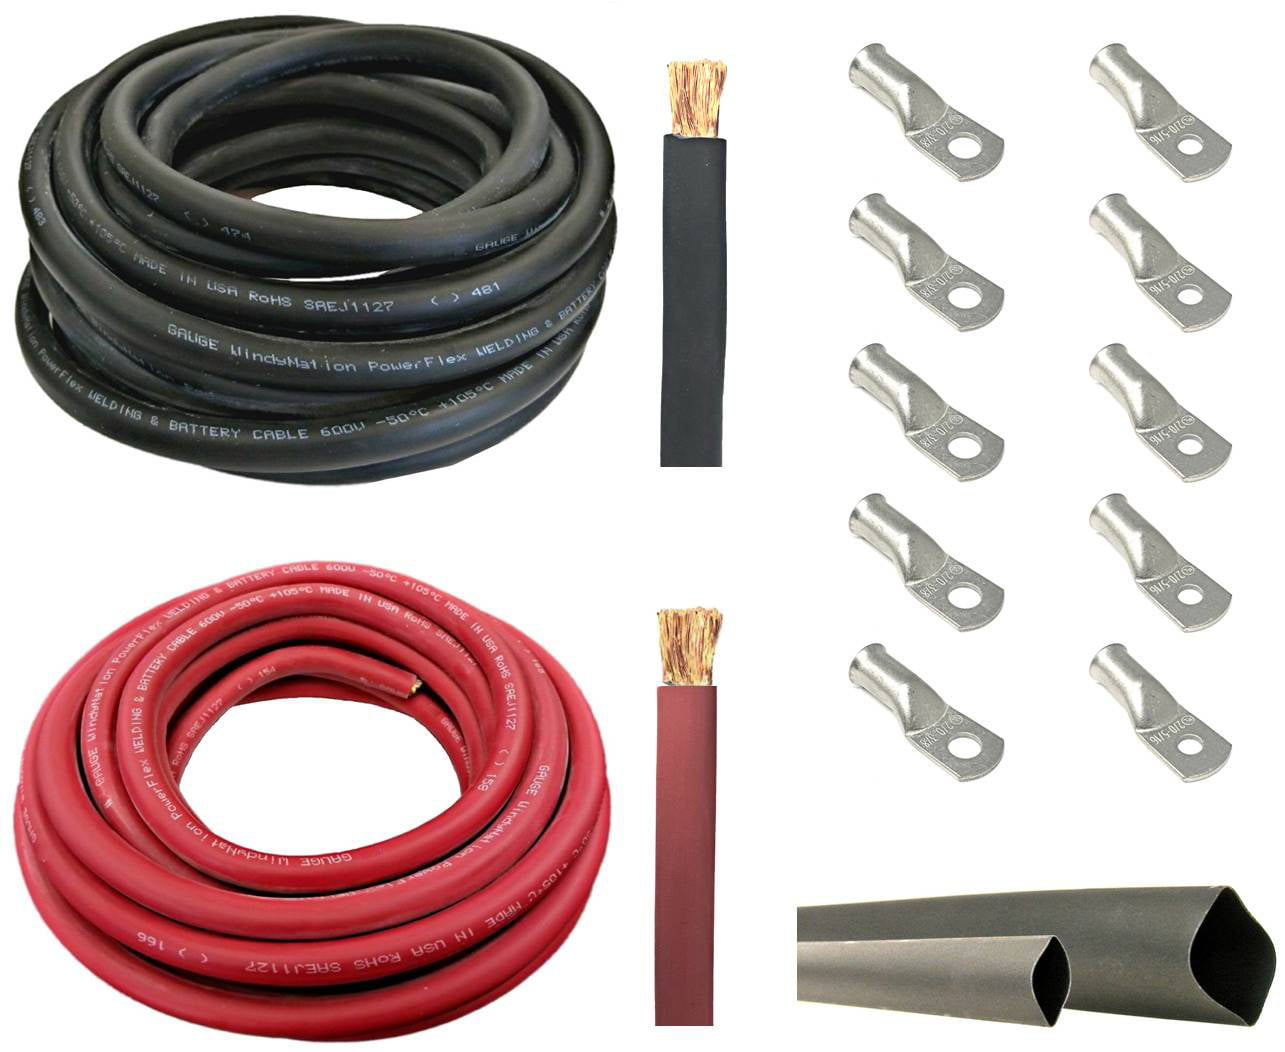 3 Feet Black Heat Shrink Tubing 10pcs of 3/8 Tinned Copper Cable Lug Terminal Connectors 25 Feet Black Welding Battery Pure Copper Flexible Cable 2/0 Gauge 2/0 AWG 25 Feet Red 